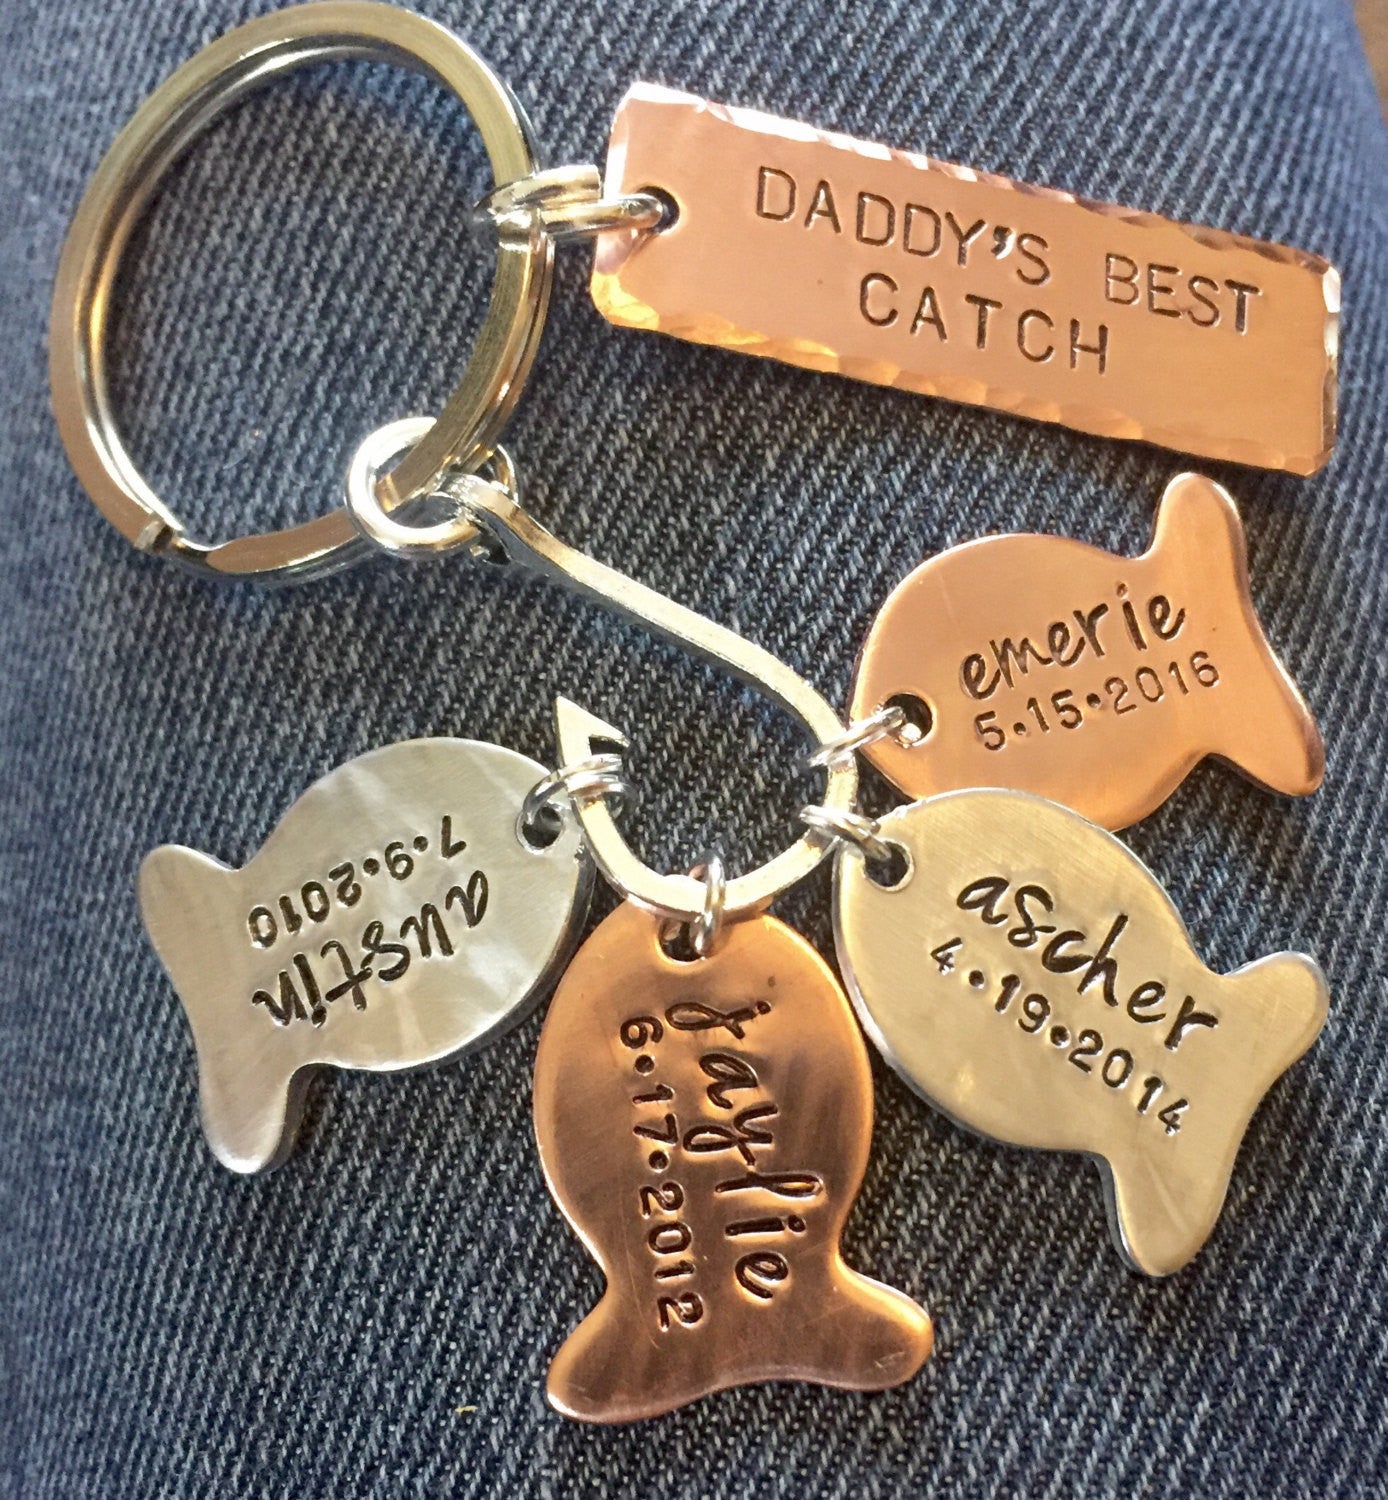 Daddys #1 Fishing Buddies, Hooked On Dad, Fishing Keychain - Natashaaloha, jewelry, bracelets, necklace, keychains, fishing lures, gifts for men, charms, personalized, 